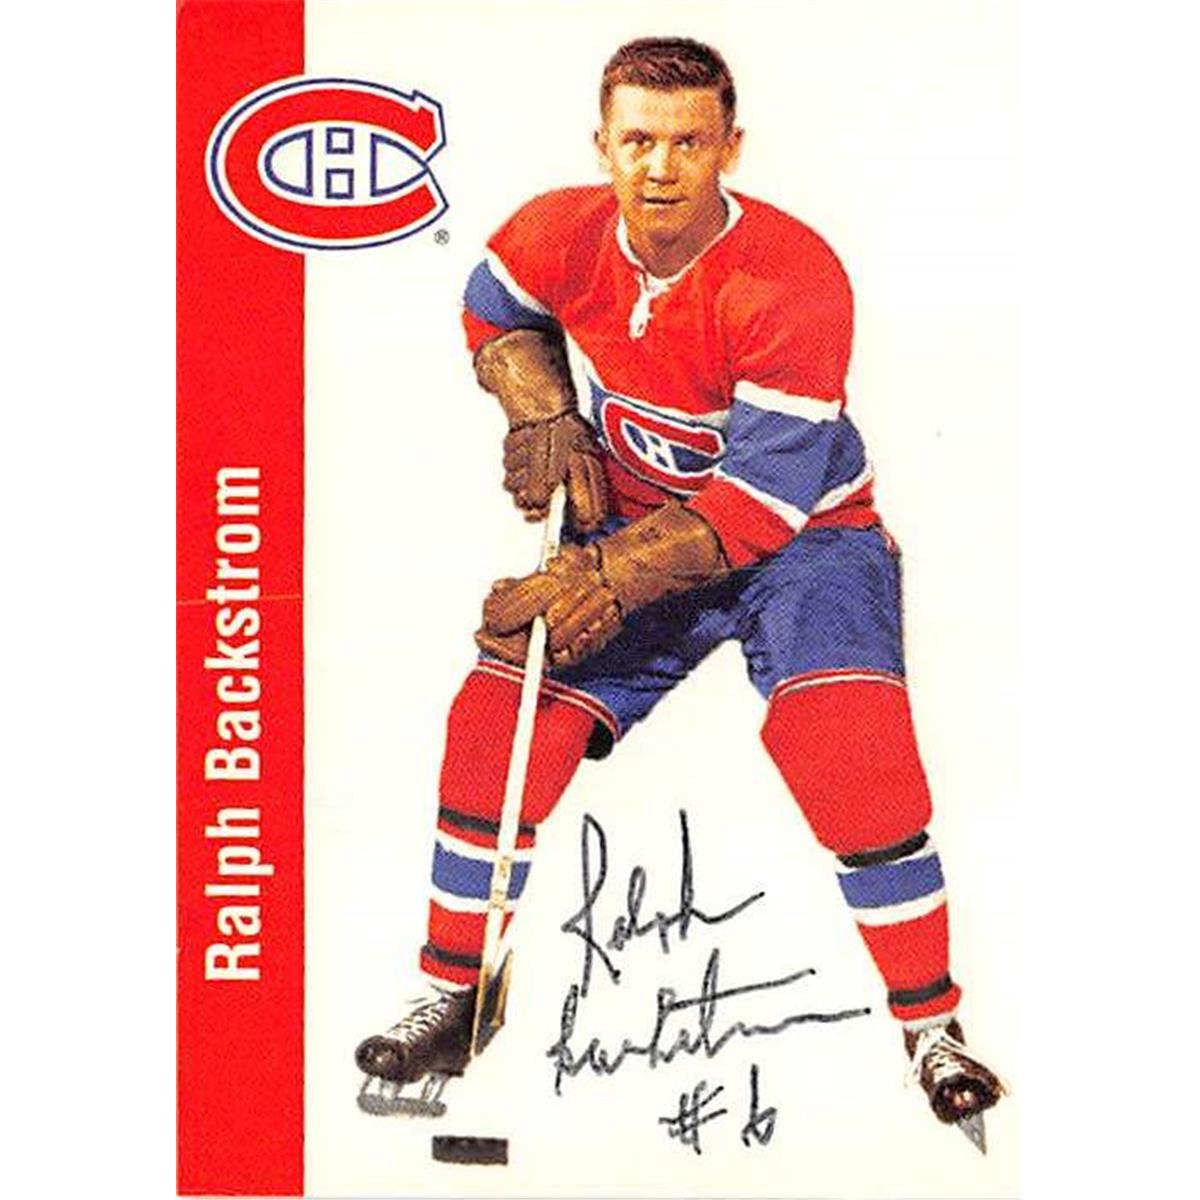 Picture of Autograph Warehouse 376875 1994 Parkhurst Missing Link 1956 77 Ralph Backstrom Autographed Hockey Card